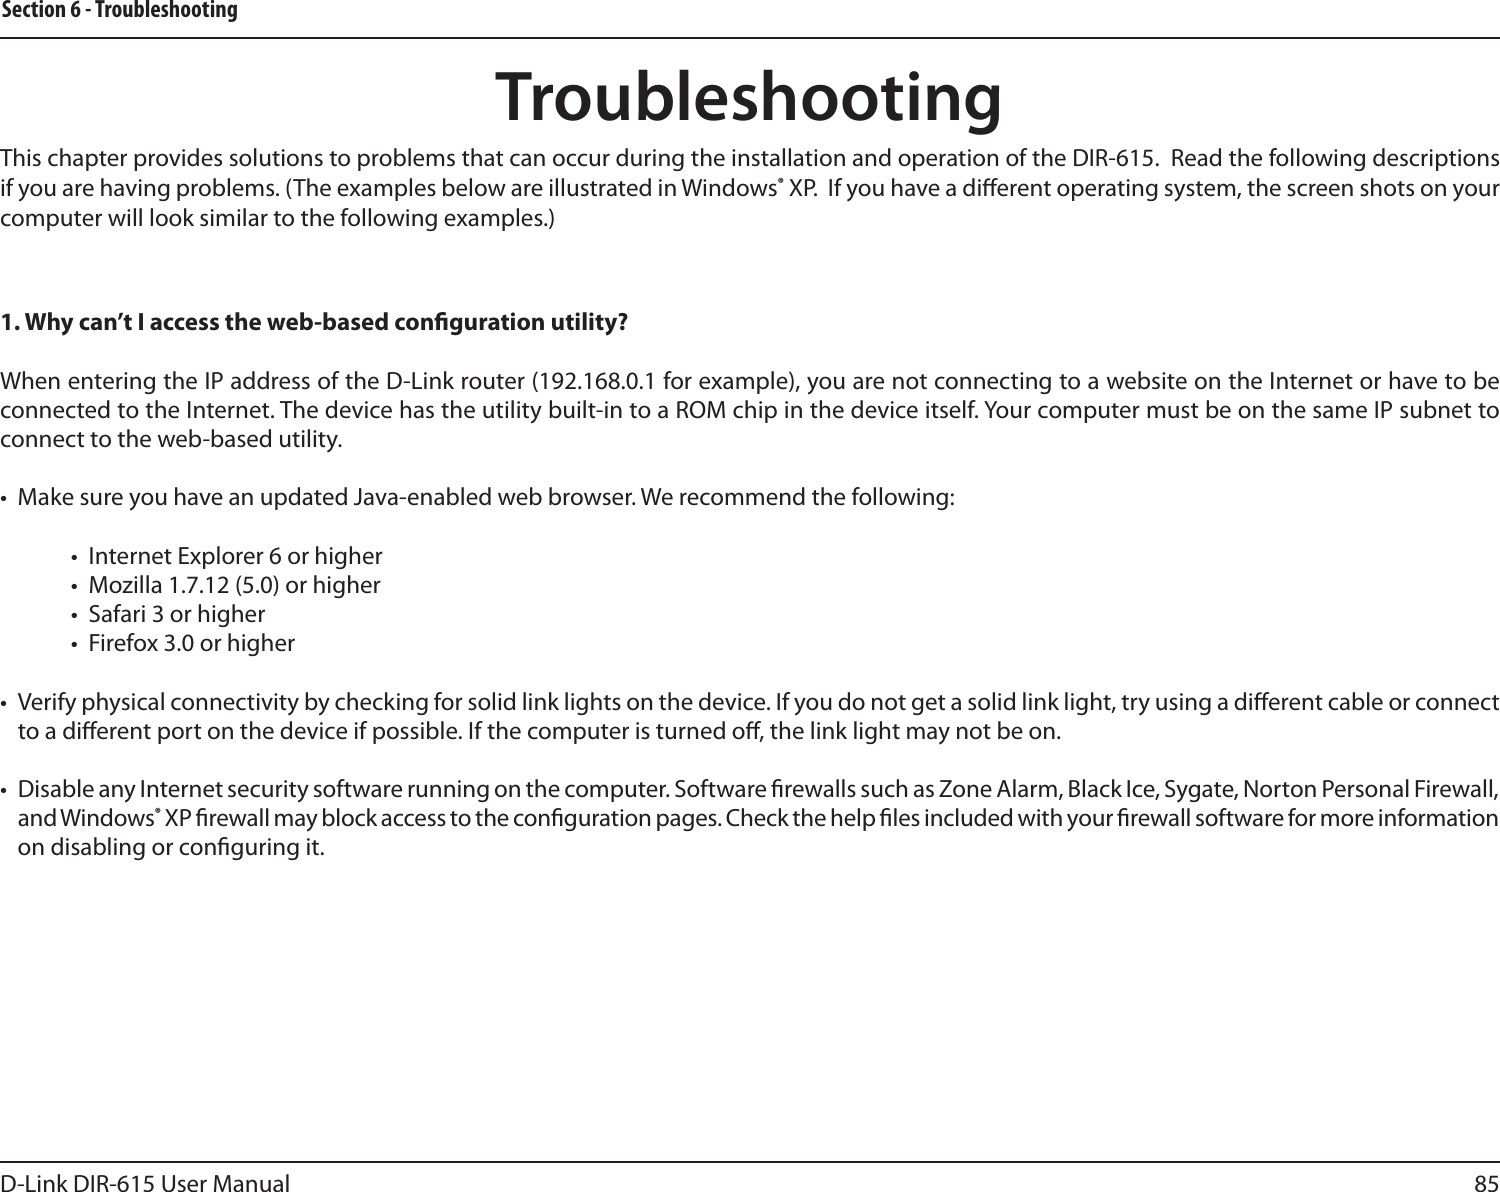 85D-Link DIR-615 User ManualSection 6 - TroubleshootingTroubleshootingThis chapter provides solutions to problems that can occur during the installation and operation of the DIR-615.  Read the following descriptions if you are having problems. (The examples below are illustrated in Windows® XP.  If you have a dierent operating system, the screen shots on your computer will look similar to the following examples.)1. Why can’t I access the web-based conguration utility?When entering the IP address of the D-Link router (192.168.0.1 for example), you are not connecting to a website on the Internet or have to be connected to the Internet. The device has the utility built-in to a ROM chip in the device itself. Your computer must be on the same IP subnet to connect to the web-based utility. •  Make sure you have an updated Java-enabled web browser. We recommend the following: •  Internet Explorer 6 or higher •  Mozilla 1.7.12 (5.0) or higher •  Safari 3 or higher •  Firefox 3.0 or higher •  Verify physical connectivity by checking for solid link lights on the device. If you do not get a solid link light, try using a dierent cable or connect to a dierent port on the device if possible. If the computer is turned o, the link light may not be on.•  Disable any Internet security software running on the computer. Software rewalls such as Zone Alarm, Black Ice, Sygate, Norton Personal Firewall, and Windows® XP rewall may block access to the conguration pages. Check the help les included with your rewall software for more information on disabling or conguring it.